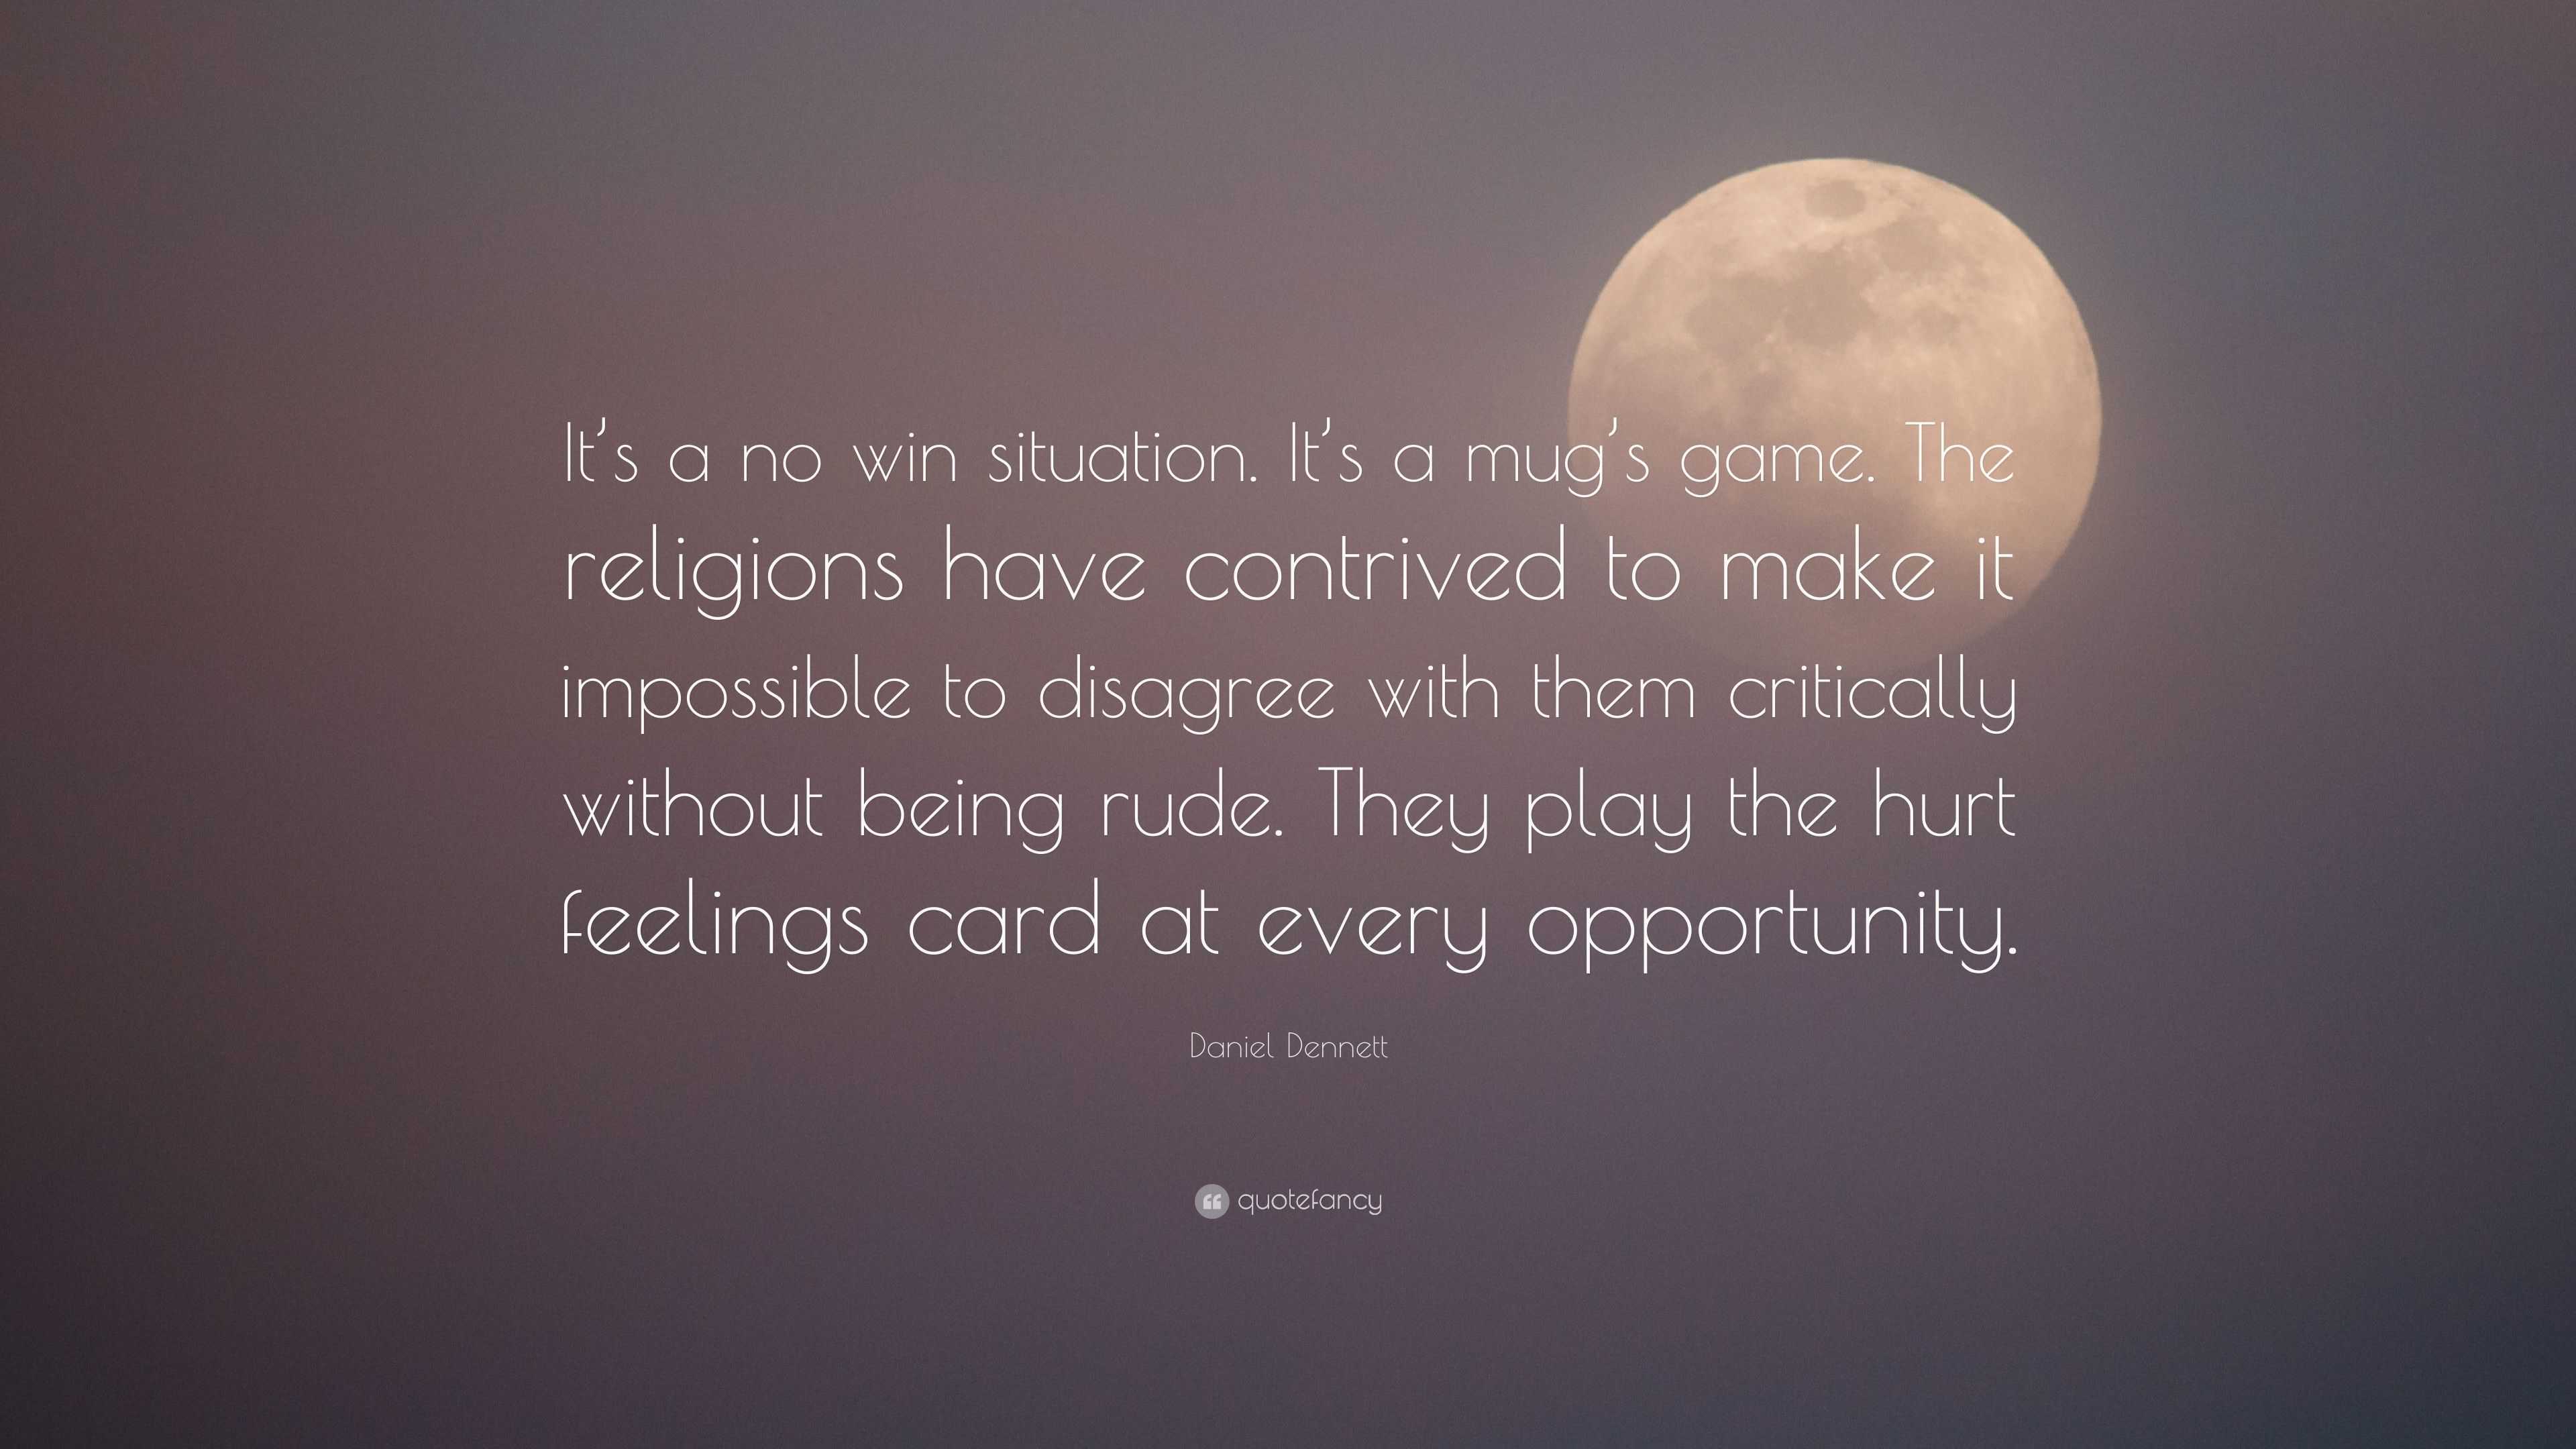 Daniel Dennett Quote It S A No Win Situation It S A Mug S Game The Religions Have Contrived To Make It Impossible To Disagree With Them Cri 7 Wallpapers Quotefancy